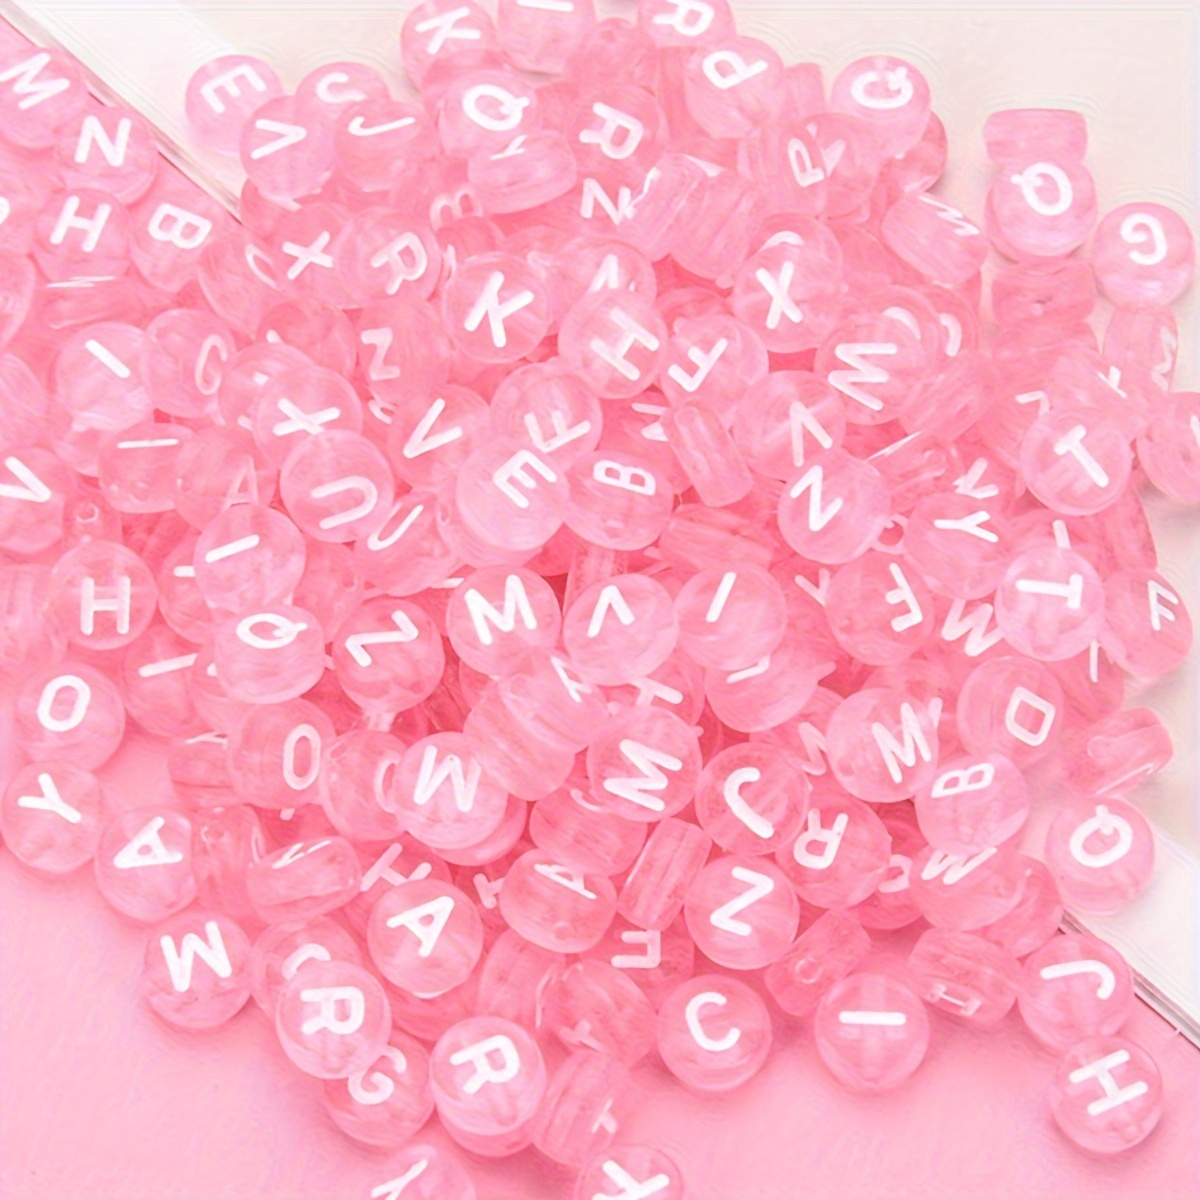 

500pcs 7mm Transparent Plastic Letter Beads For Jewelry Making Diy Special Necklaces Bracelets Key Phone Bag Chains Handicrafts Small Business Supplies